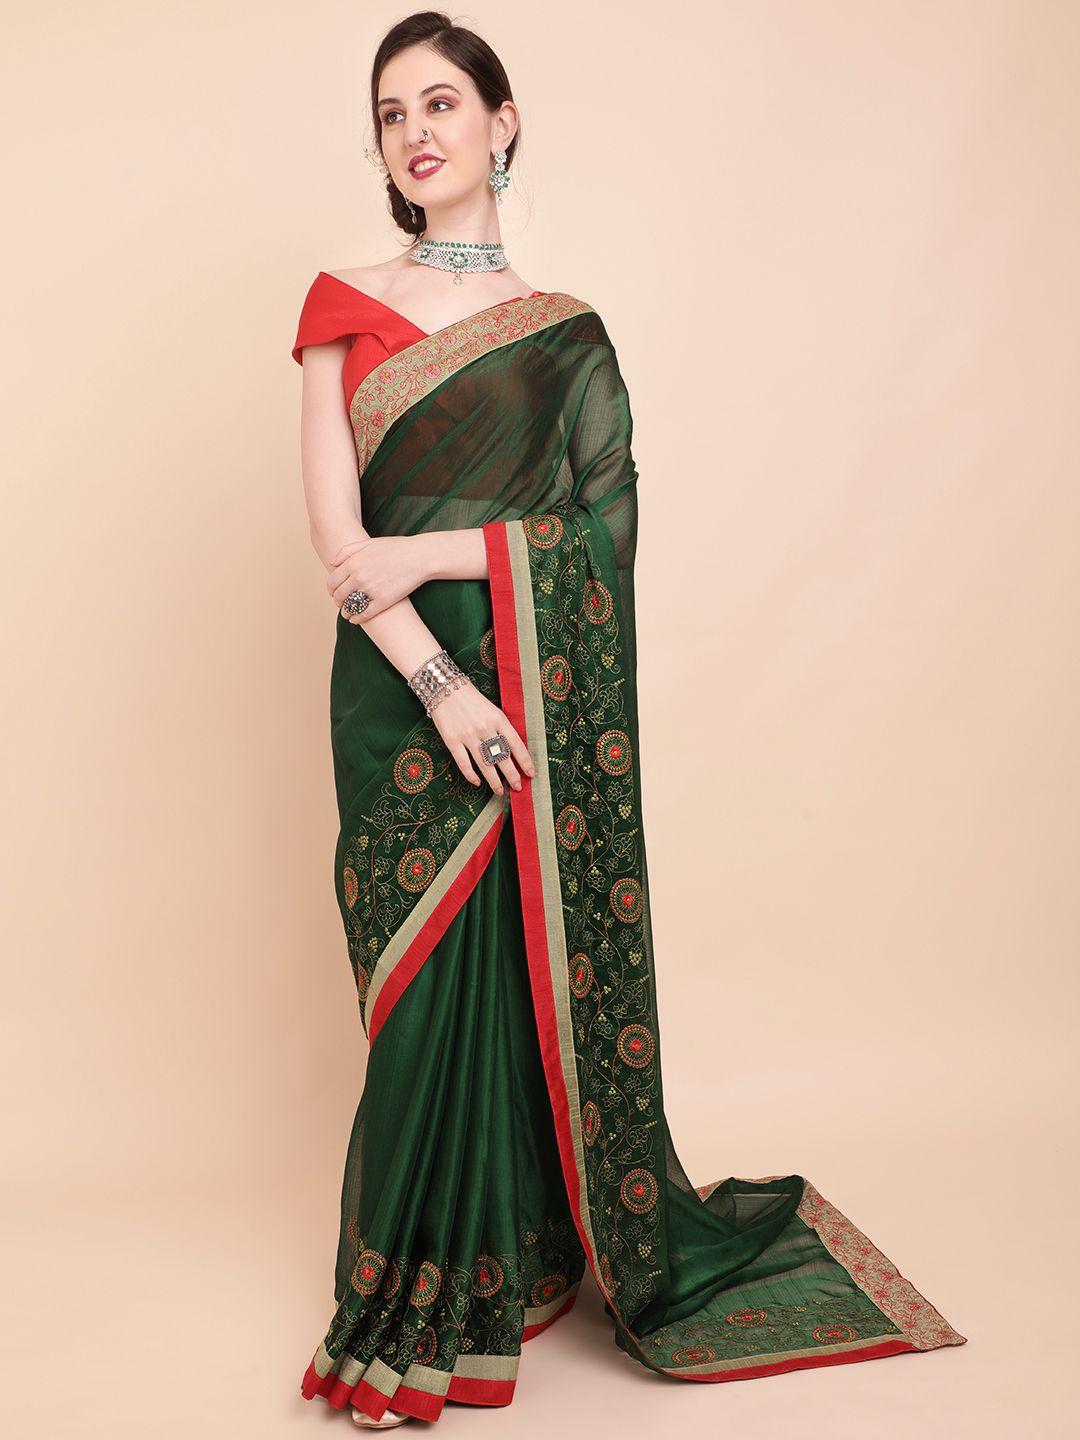 sangria olive green & red floral embroidered pure georgette saree